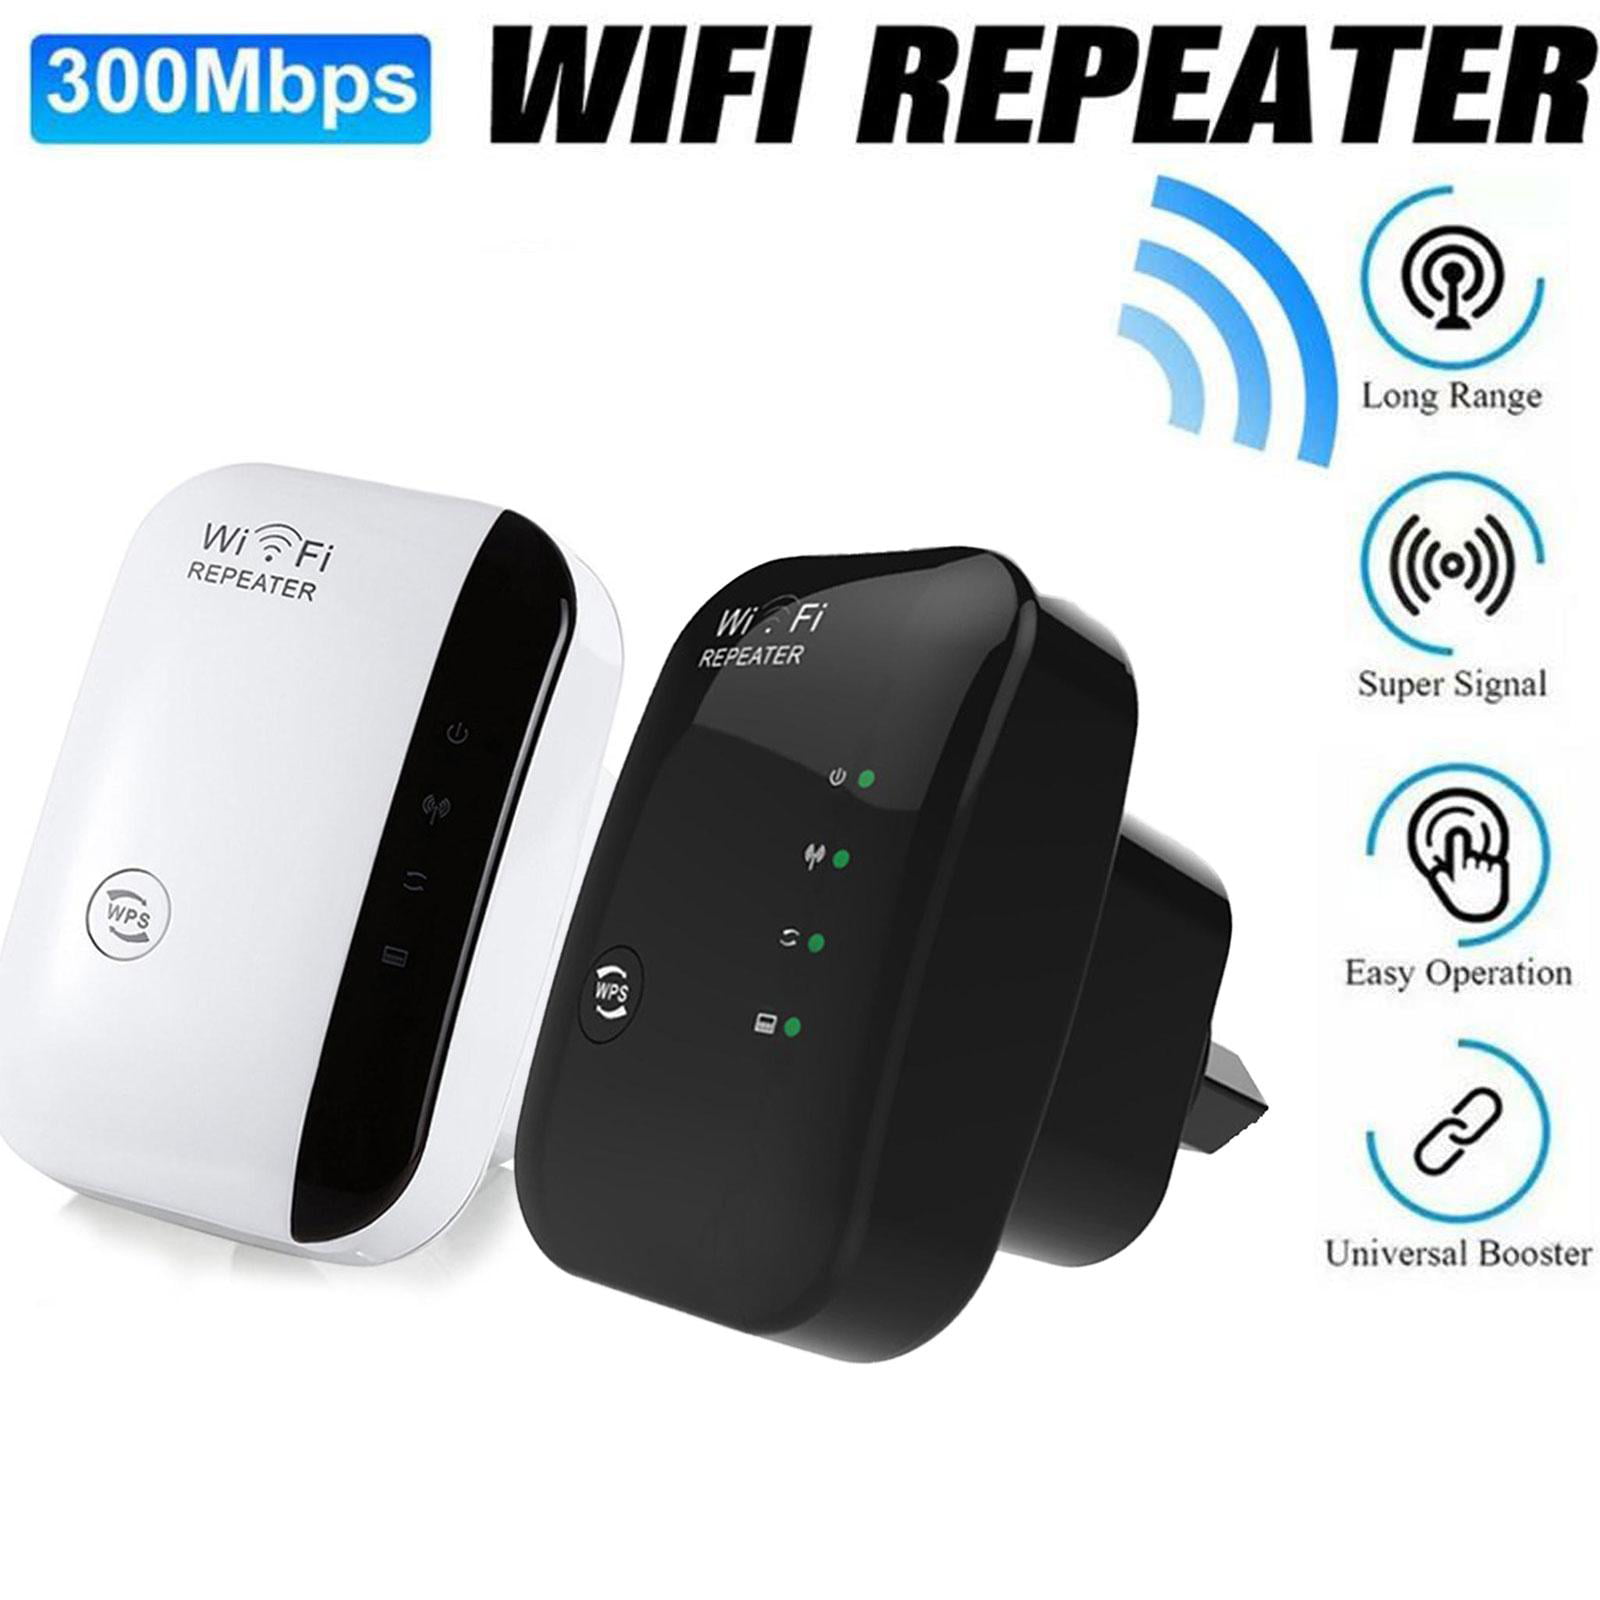 WiFi Signal Repeaters Extender Range Booster Internet Amplifier Wir Network  O5W1